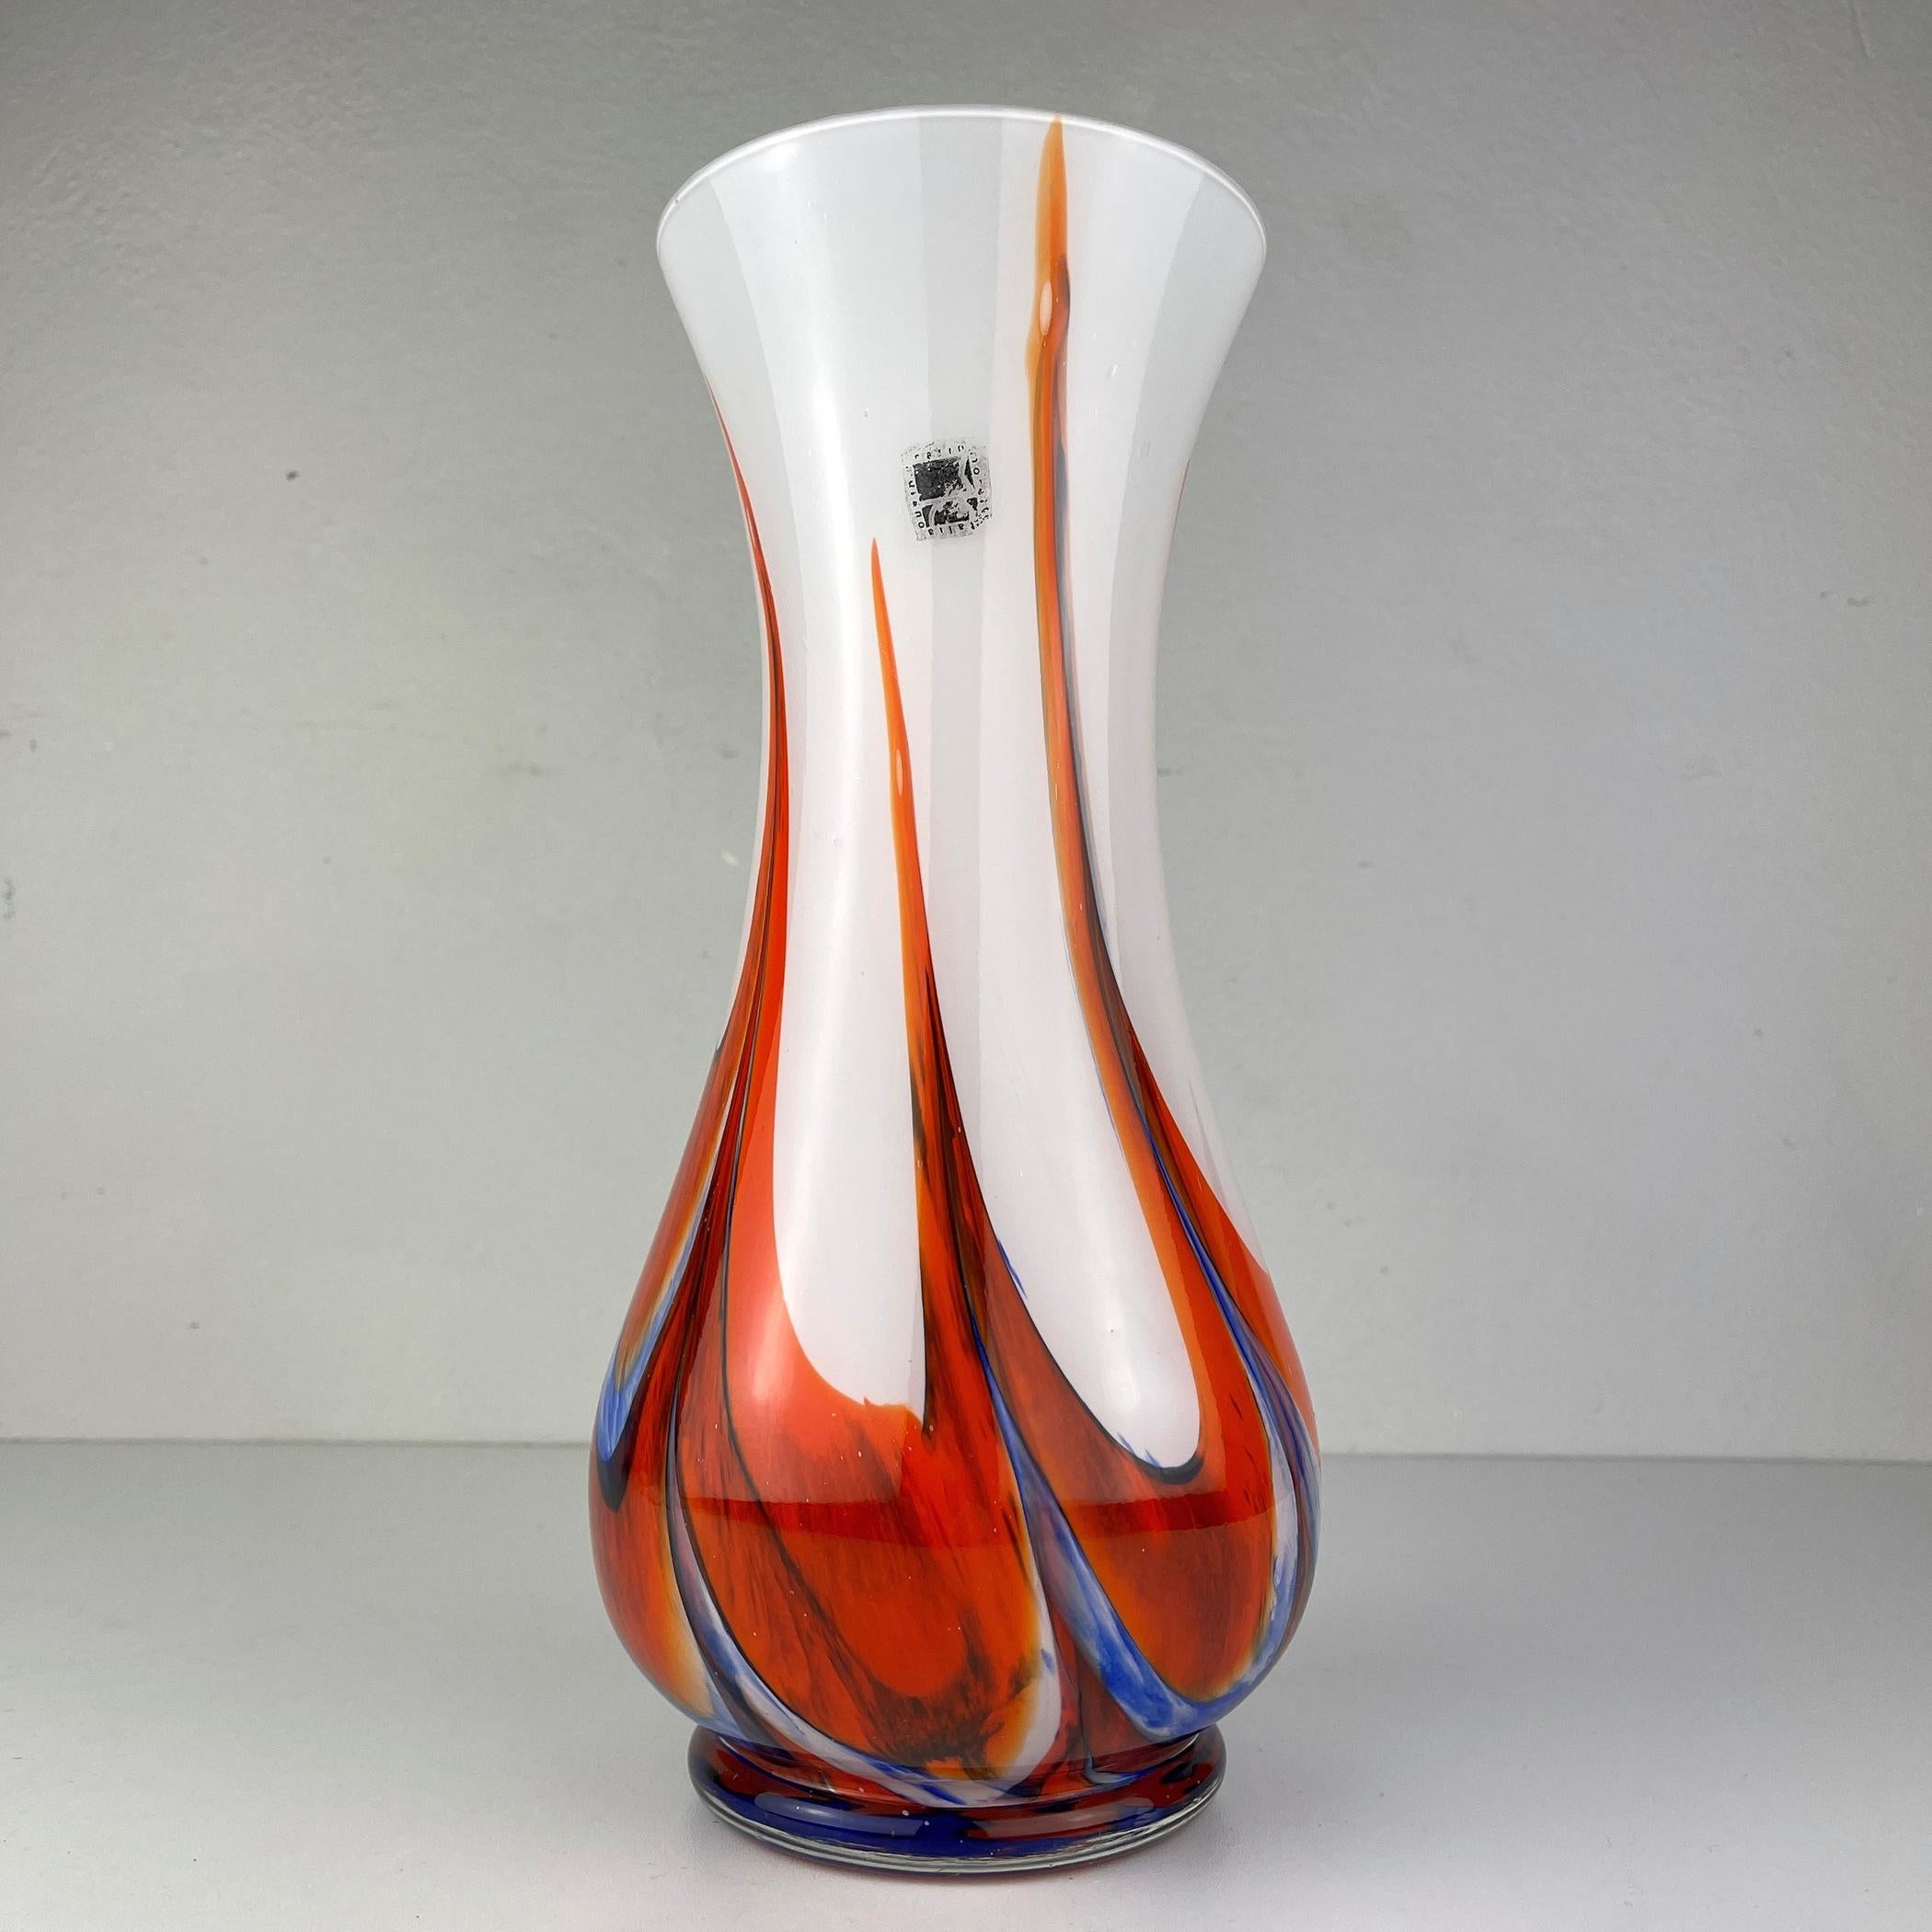 Beautiful murano glass vase by Carlo Moretti made in Italy in the 1970s. Carlo Moretti is a “factory of originals” founded in 1958 by Carlo and Giovanni Moretti, combining innovation and continuous research. Unusual original products are